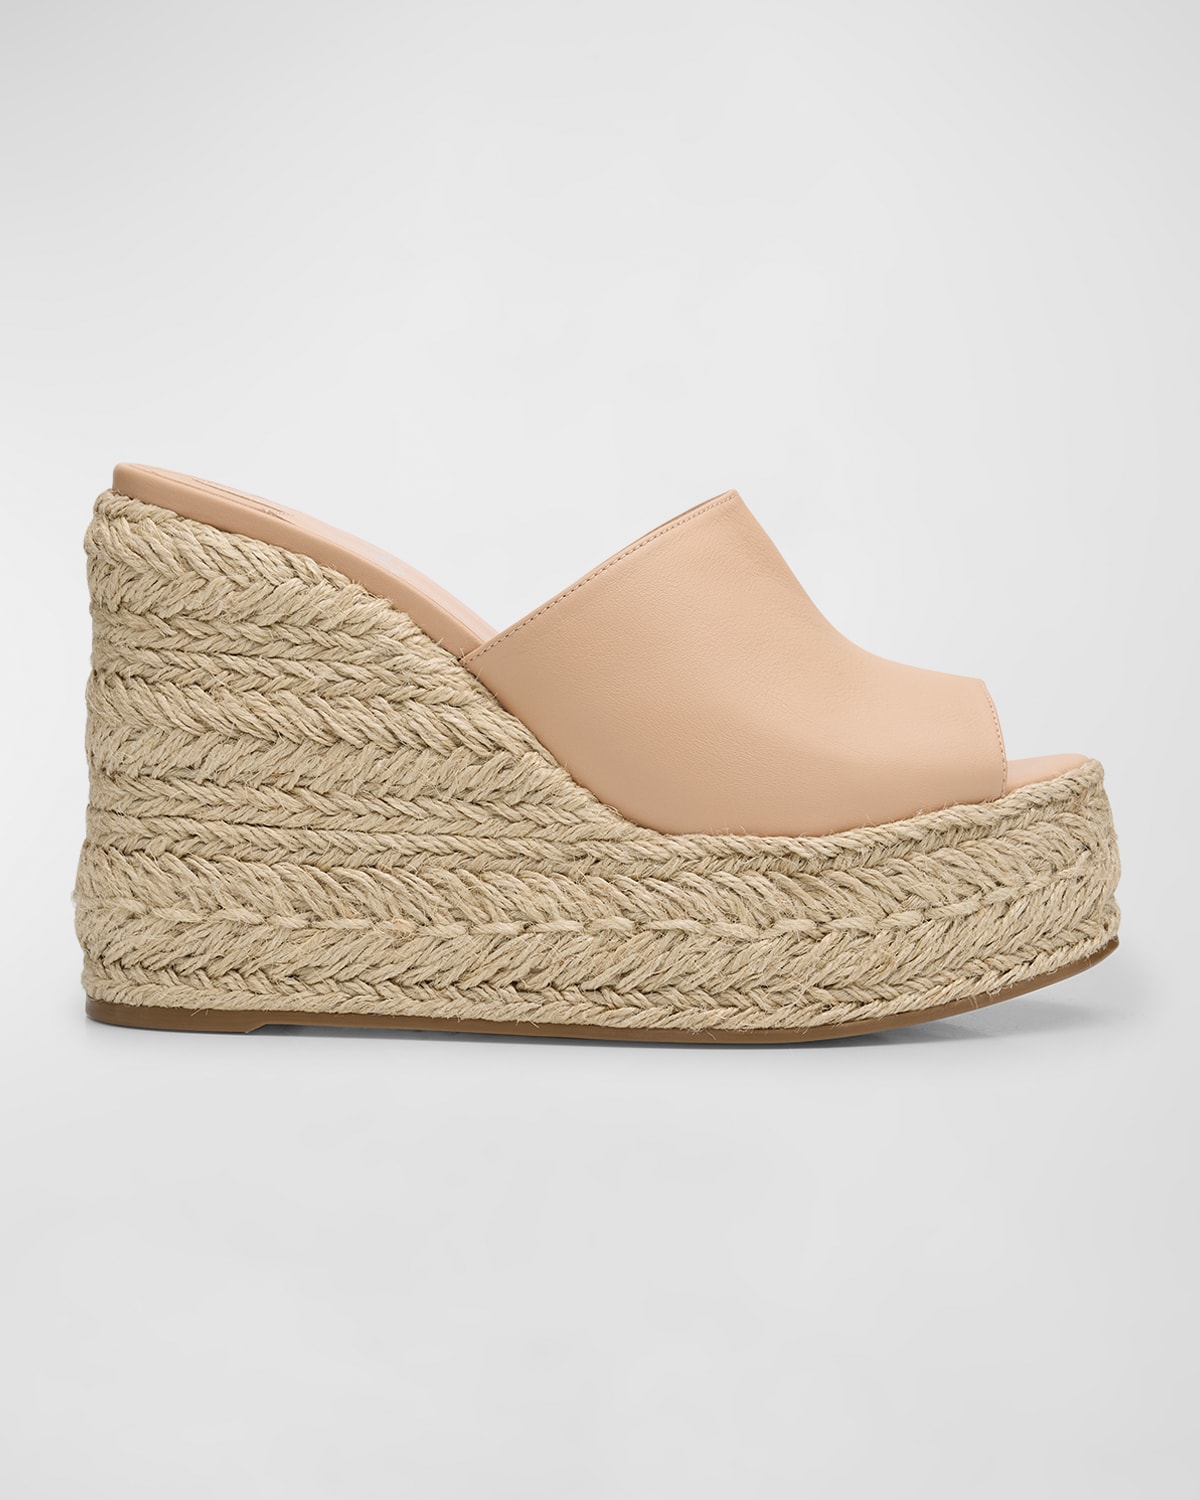 Christian Louboutin Ariella Leather Red Sole Wedge Espadrilles In Leche/natural